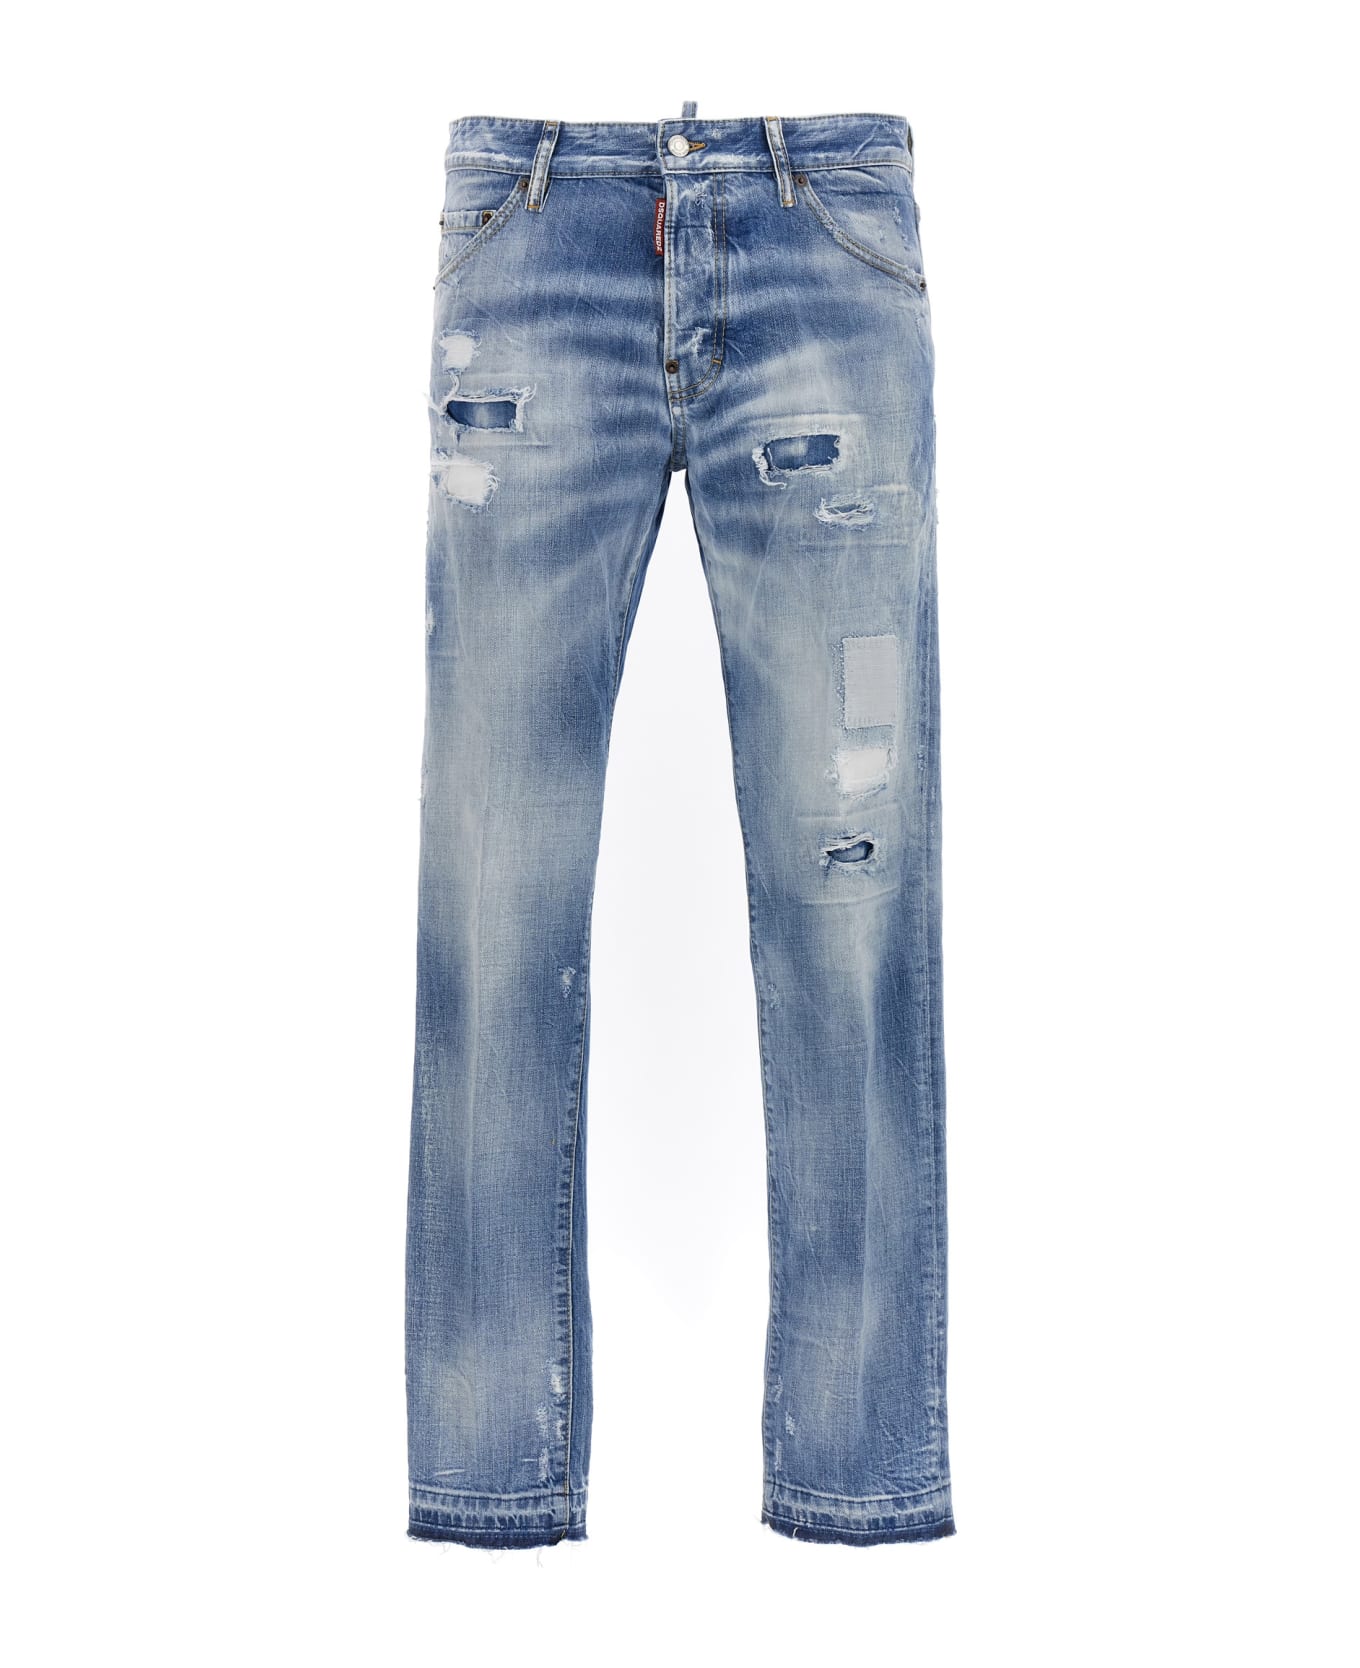 Dsquared2 Cool Guy Jeans - Light Blue